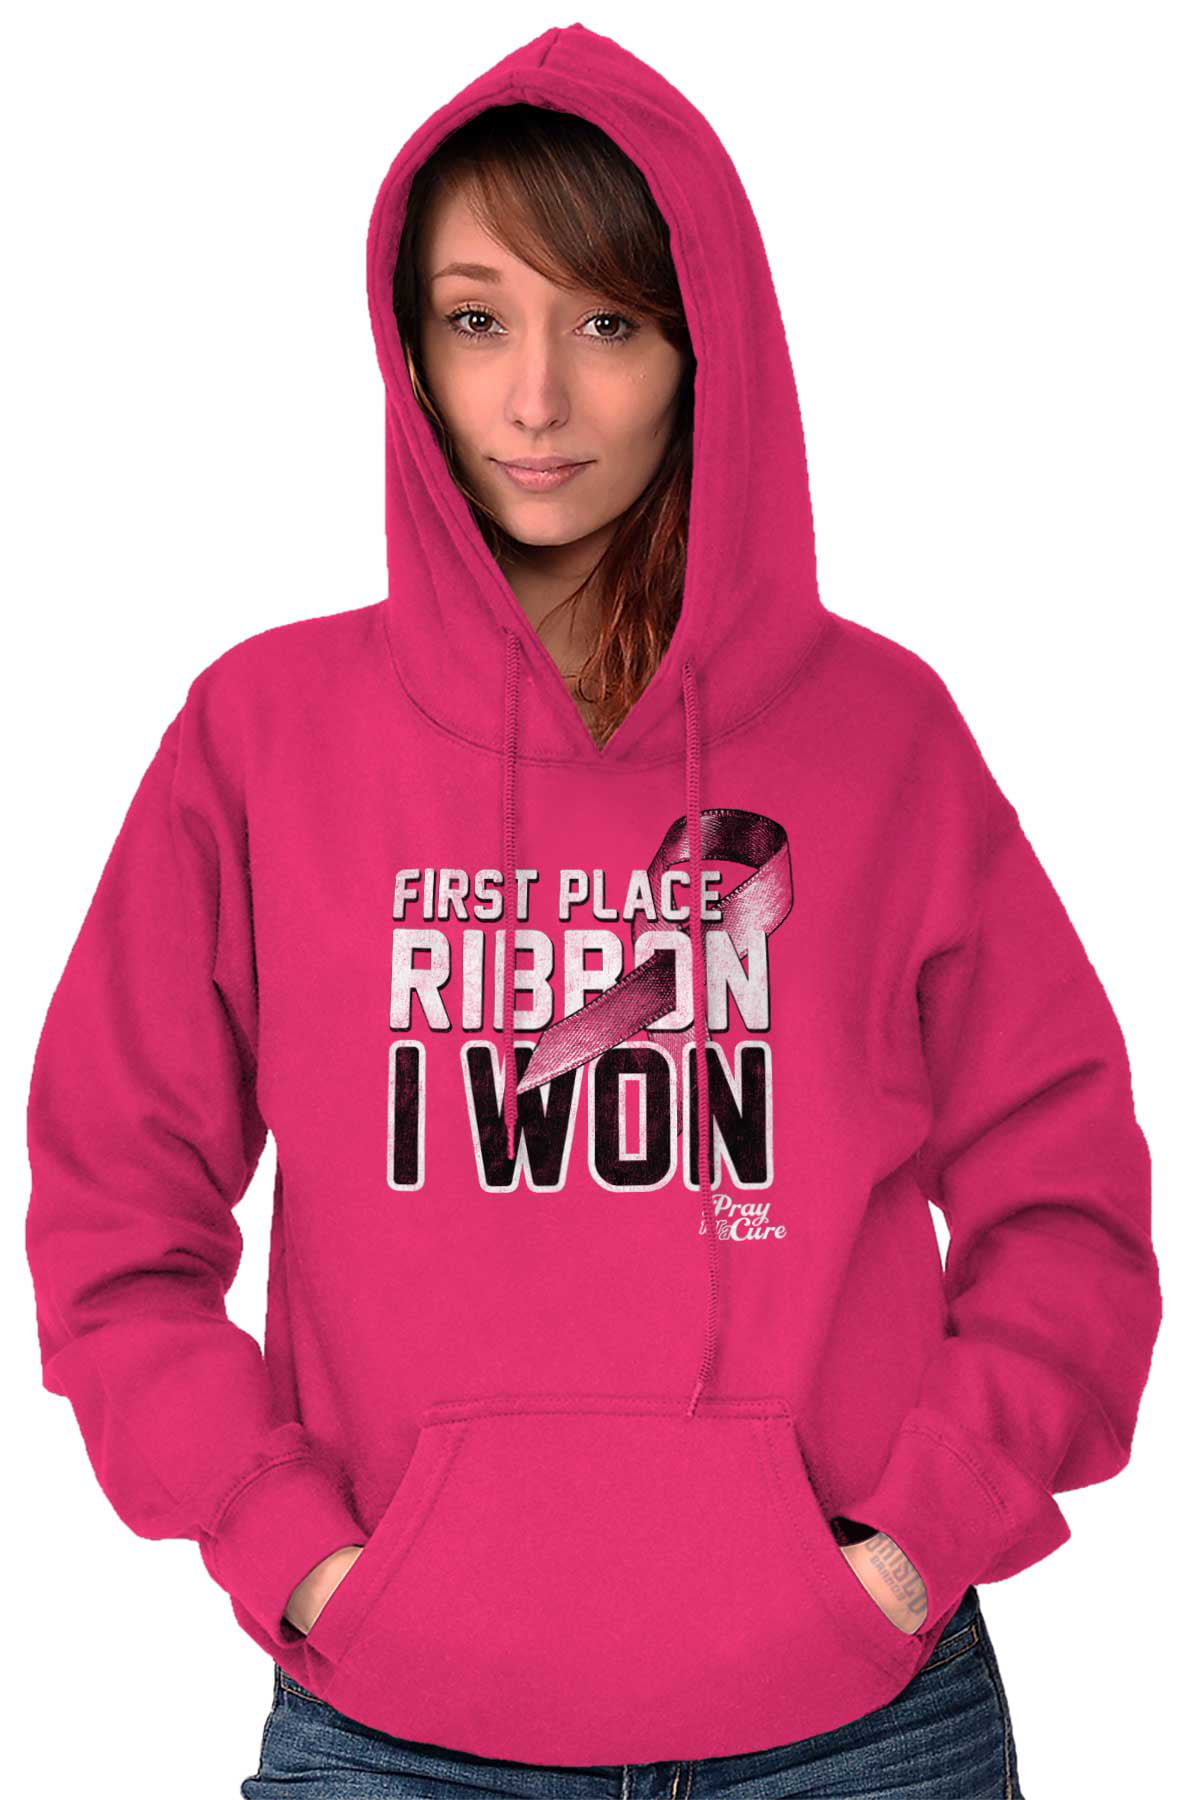 Pray for a Cure - Breast Cancer Awareness Womens Hooded Pullover ...